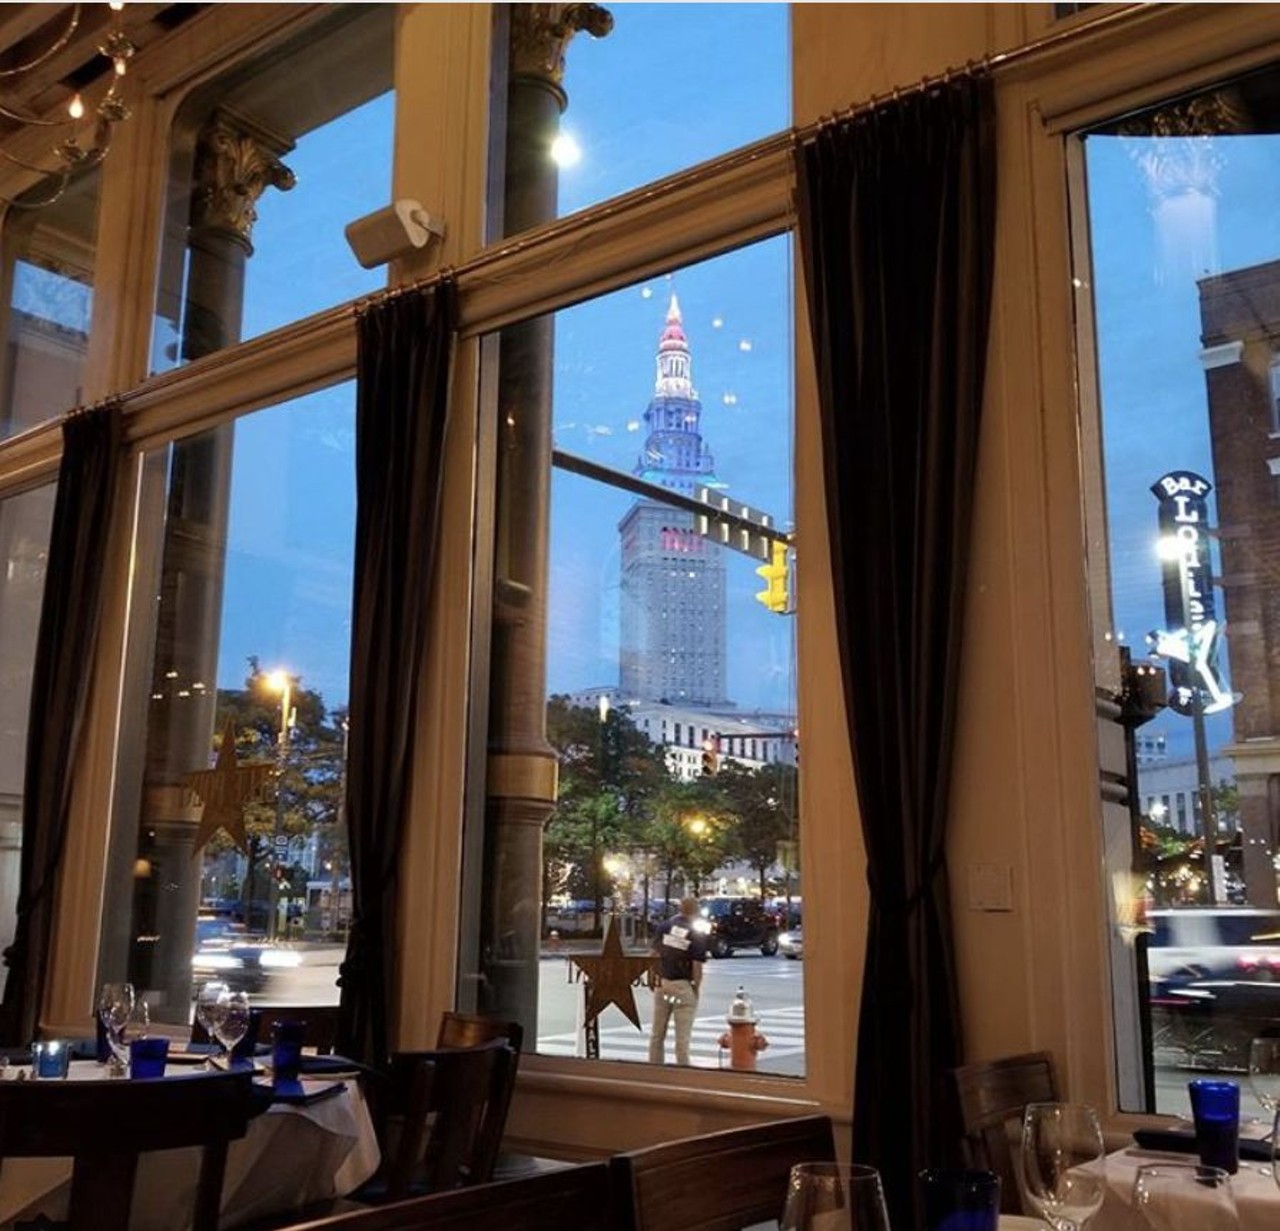 Blue Point Grille
700 West St. Clair Ave., Cleveland
You might miss a bit of the dinner table conversation at this Warehouse District dining room since it&#146;s so easy to get distracted by Blue Point Grille&#146;s larger-than-life view of Terminal Tower.
Photo via hallschild/Instagram